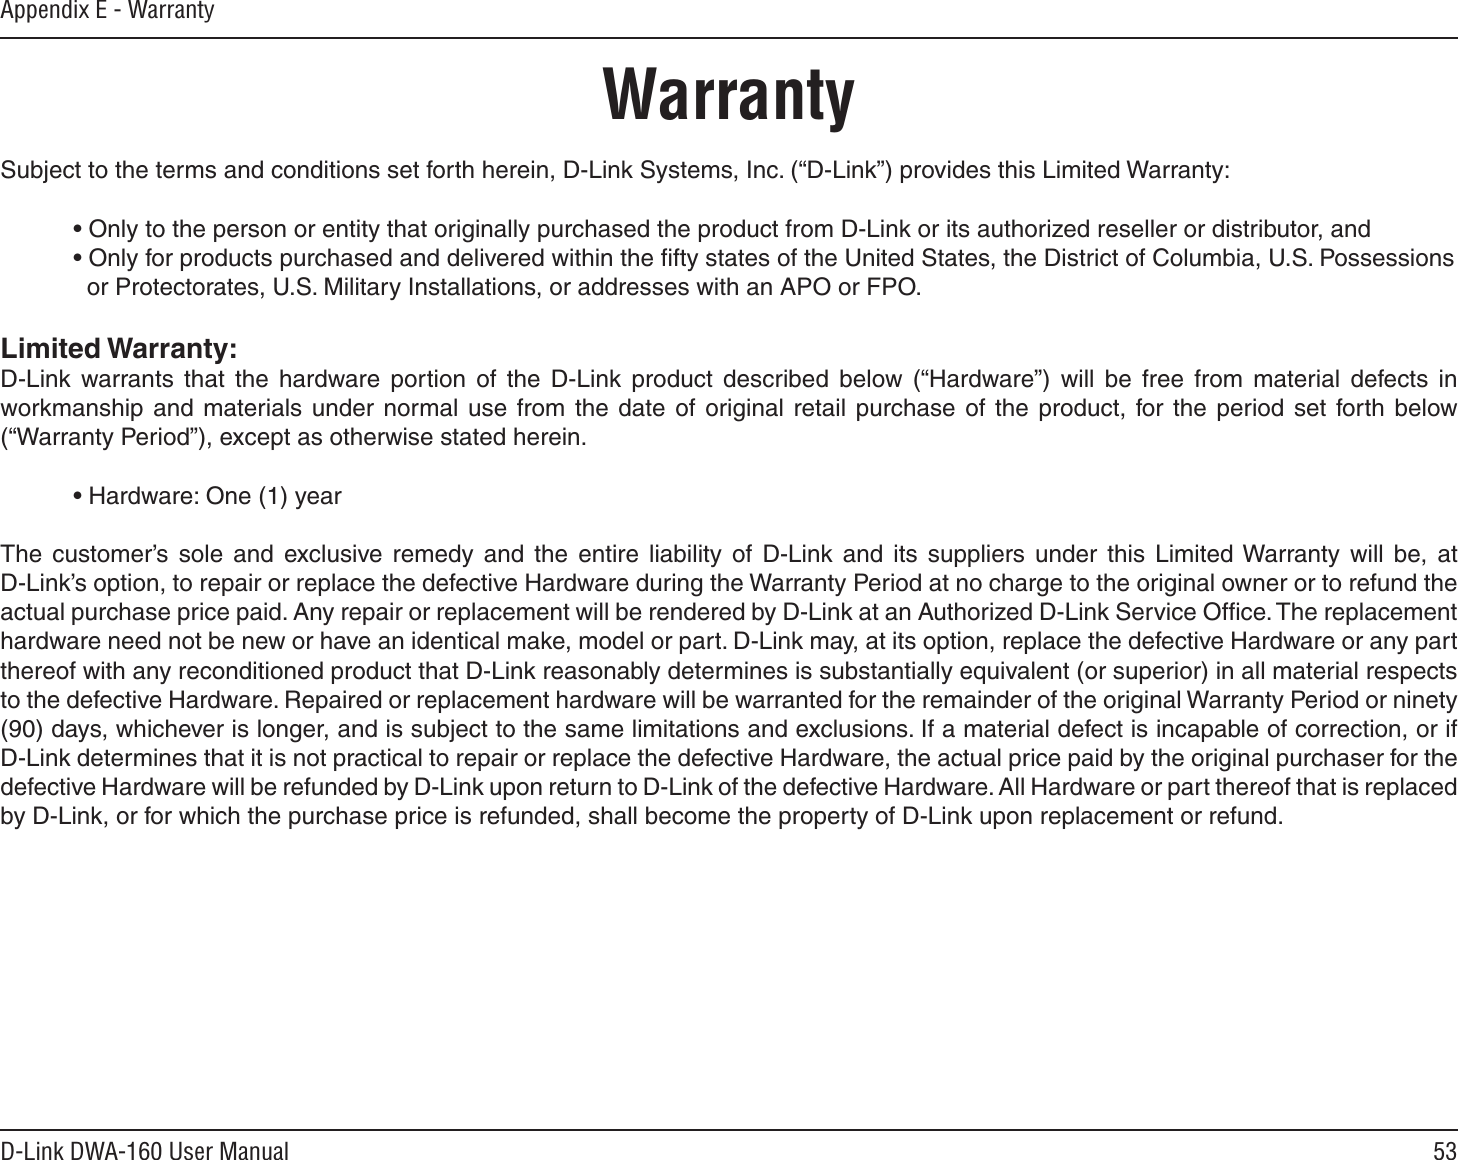 53D-Link DWA-160 User ManualAppendix E - WarrantyWarrantySubject to the terms and conditions set forth herein, D-Link Systems, Inc. (“D-Link”) provides this Limited Warranty:• Only to the person or entity that originally purchased the product from D-Link or its authorized reseller or distributor, and• Only for products purchased and delivered within the ﬁfty states of the United States, the District of Columbia, U.S. Possessions   or Protectorates, U.S. Military Installations, or addresses with an APO or FPO.Limited Warranty:D-Link warrants that the hardware portion of the D-Link product described below (“Hardware”) will be free from material defects in workmanship and materials under normal use from the date of original retail purchase of the product, for the period set forth below (“Warranty Period”), except as otherwise stated herein.• Hardware: One (1) yearThe customer’s sole and exclusive remedy and the entire liability of D-Link and its suppliers under this Limited Warranty will be, at D-Link’s option, to repair or replace the defective Hardware during the Warranty Period at no charge to the original owner or to refund the actual purchase price paid. Any repair or replacement will be rendered by D-Link at an Authorized D-Link Service Ofﬁce. The replacement hardware need not be new or have an identical make, model or part. D-Link may, at its option, replace the defective Hardware or any part thereof with any reconditioned product that D-Link reasonably determines is substantially equivalent (or superior) in all material respects to the defective Hardware. Repaired or replacement hardware will be warranted for the remainder of the original Warranty Period or ninety (90) days, whichever is longer, and is subject to the same limitations and exclusions. If a material defect is incapable of correction, or if D-Link determines that it is not practical to repair or replace the defective Hardware, the actual price paid by the original purchaser for the defective Hardware will be refunded by D-Link upon return to D-Link of the defective Hardware. All Hardware or part thereof that is replaced by D-Link, or for which the purchase price is refunded, shall become the property of D-Link upon replacement or refund.